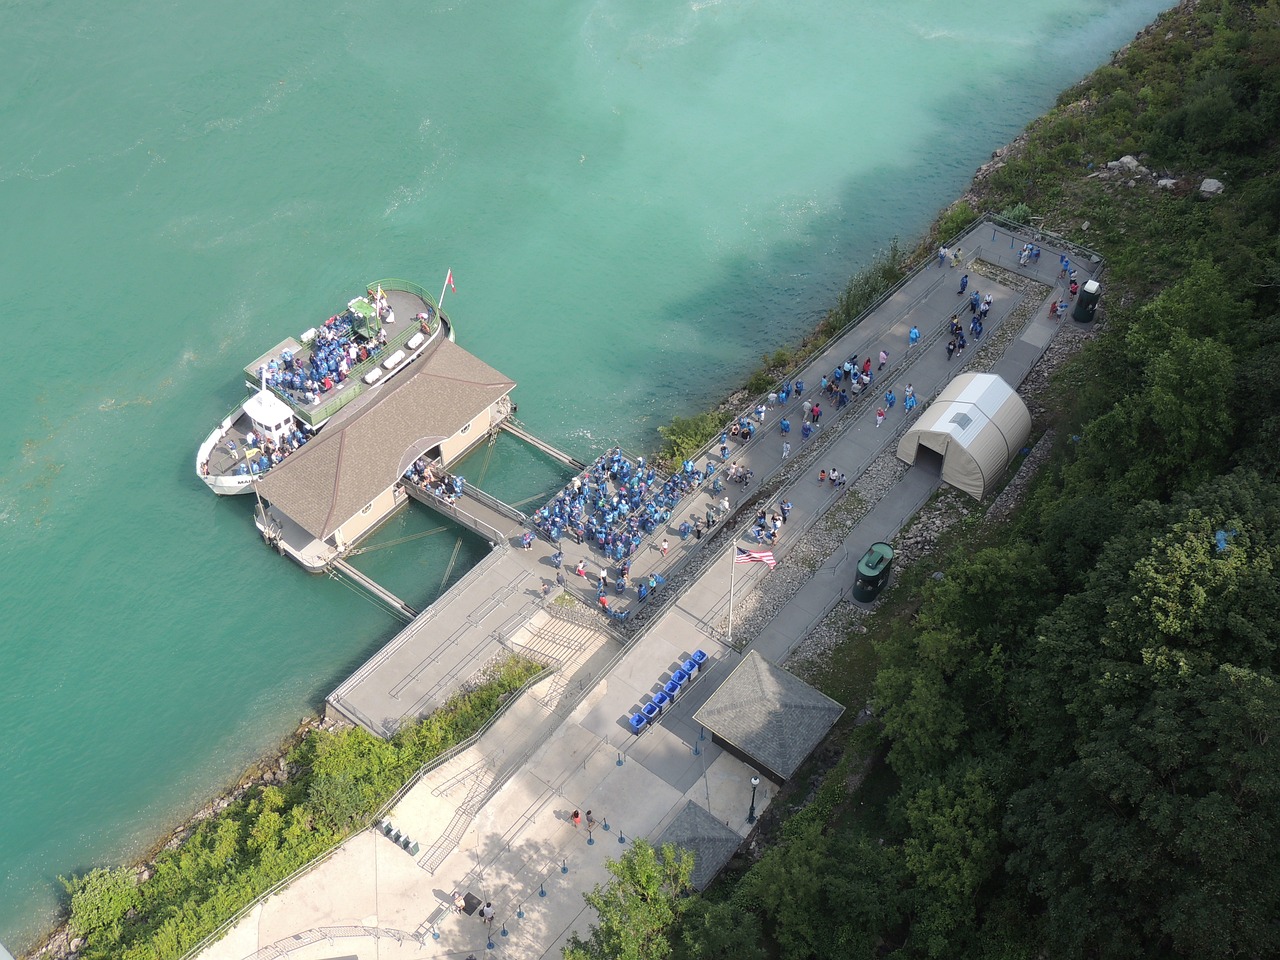 Looking Down on Maid of the Mist